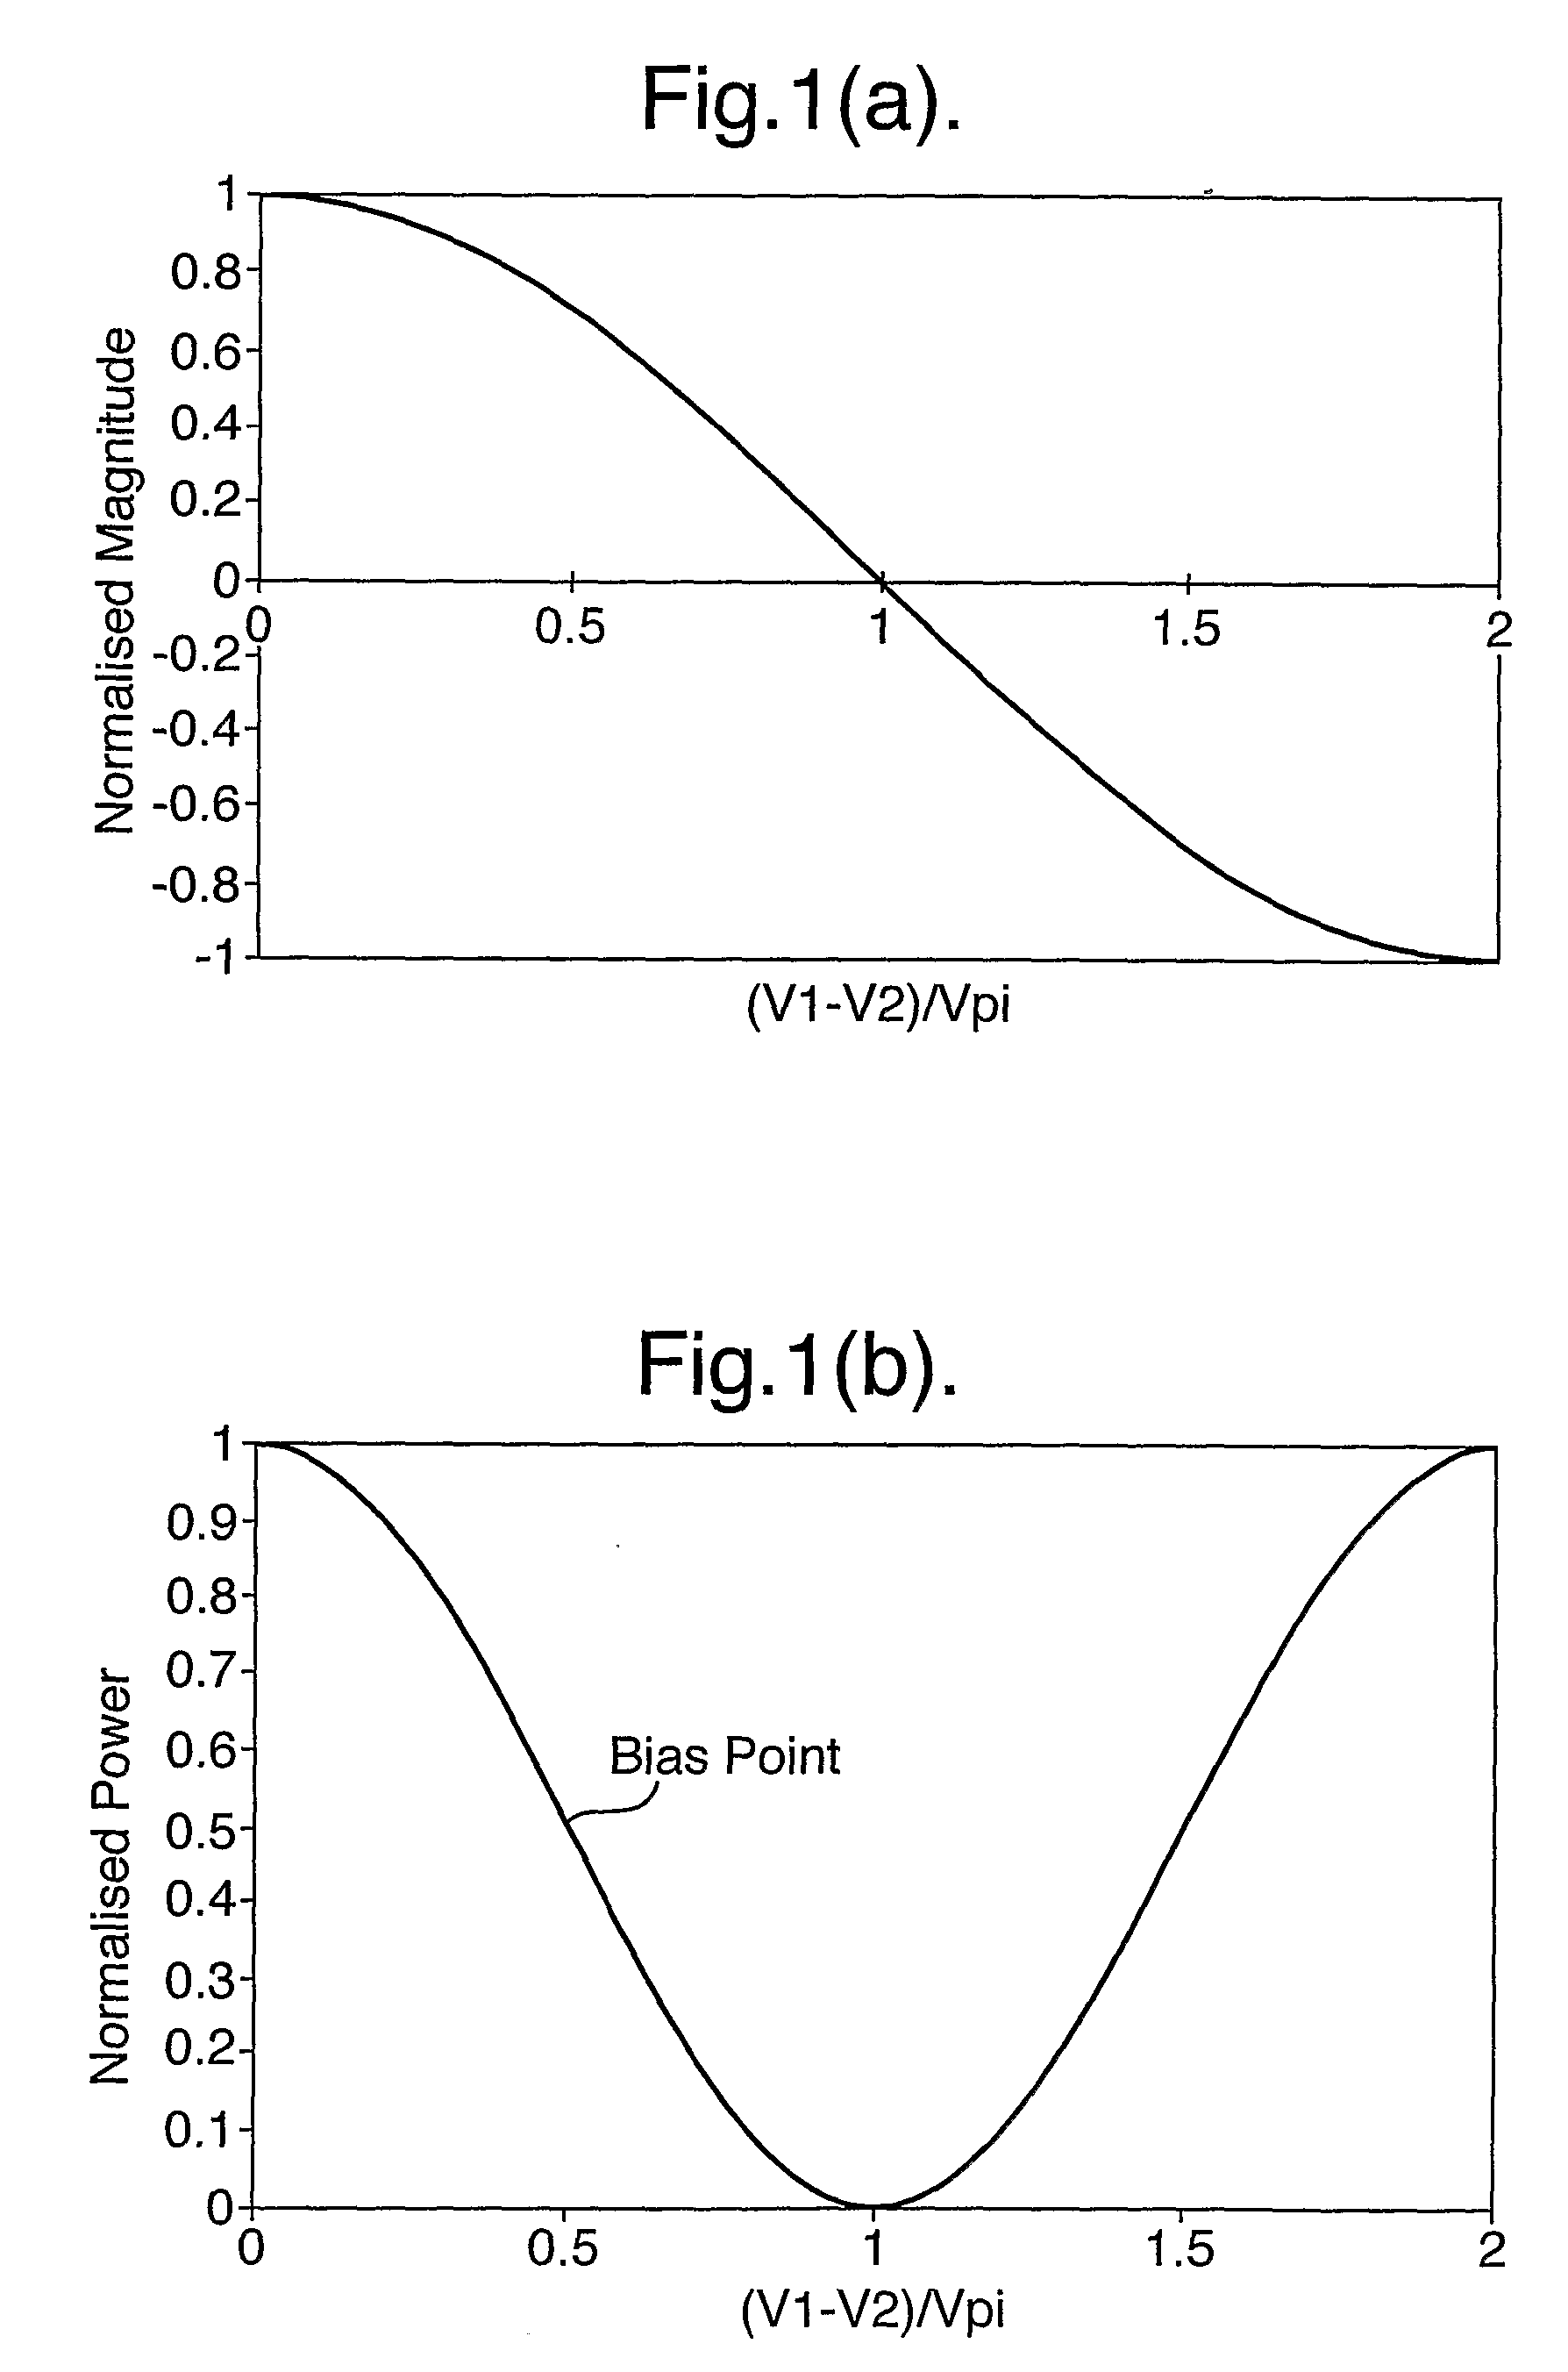 Method and Apparatus for Producing High Extinction Ratio Data Modulation Formats